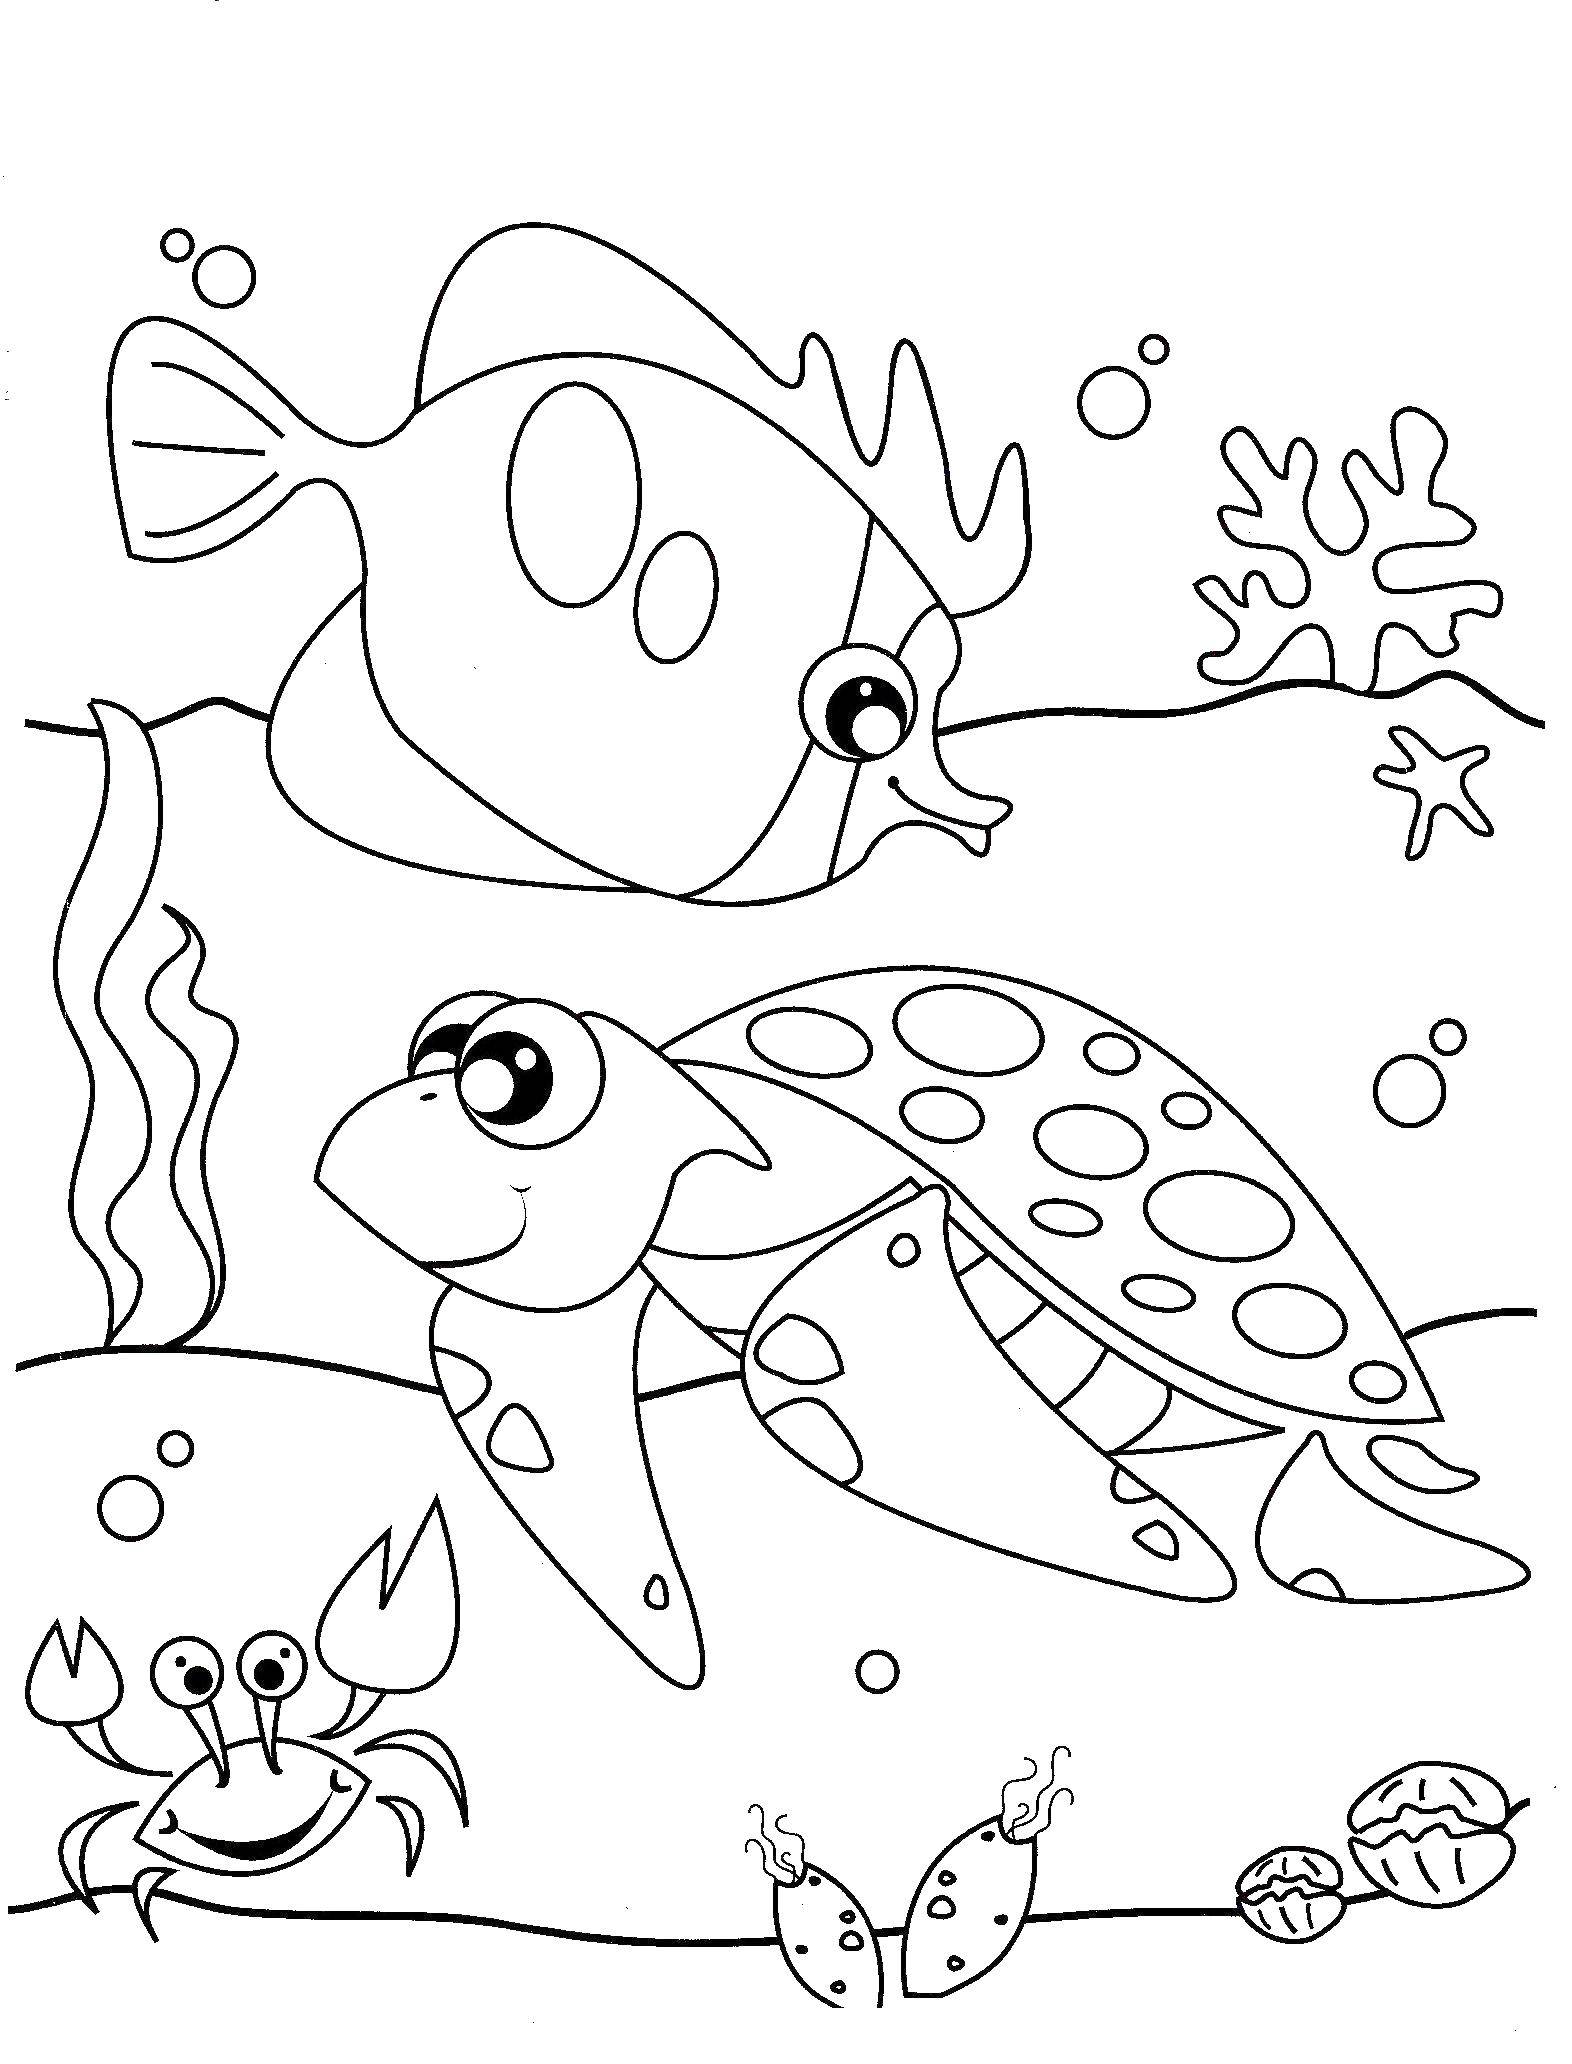 Coloring Marine life. Category marine. Tags:  Underwater world, fish, turtle, crab.